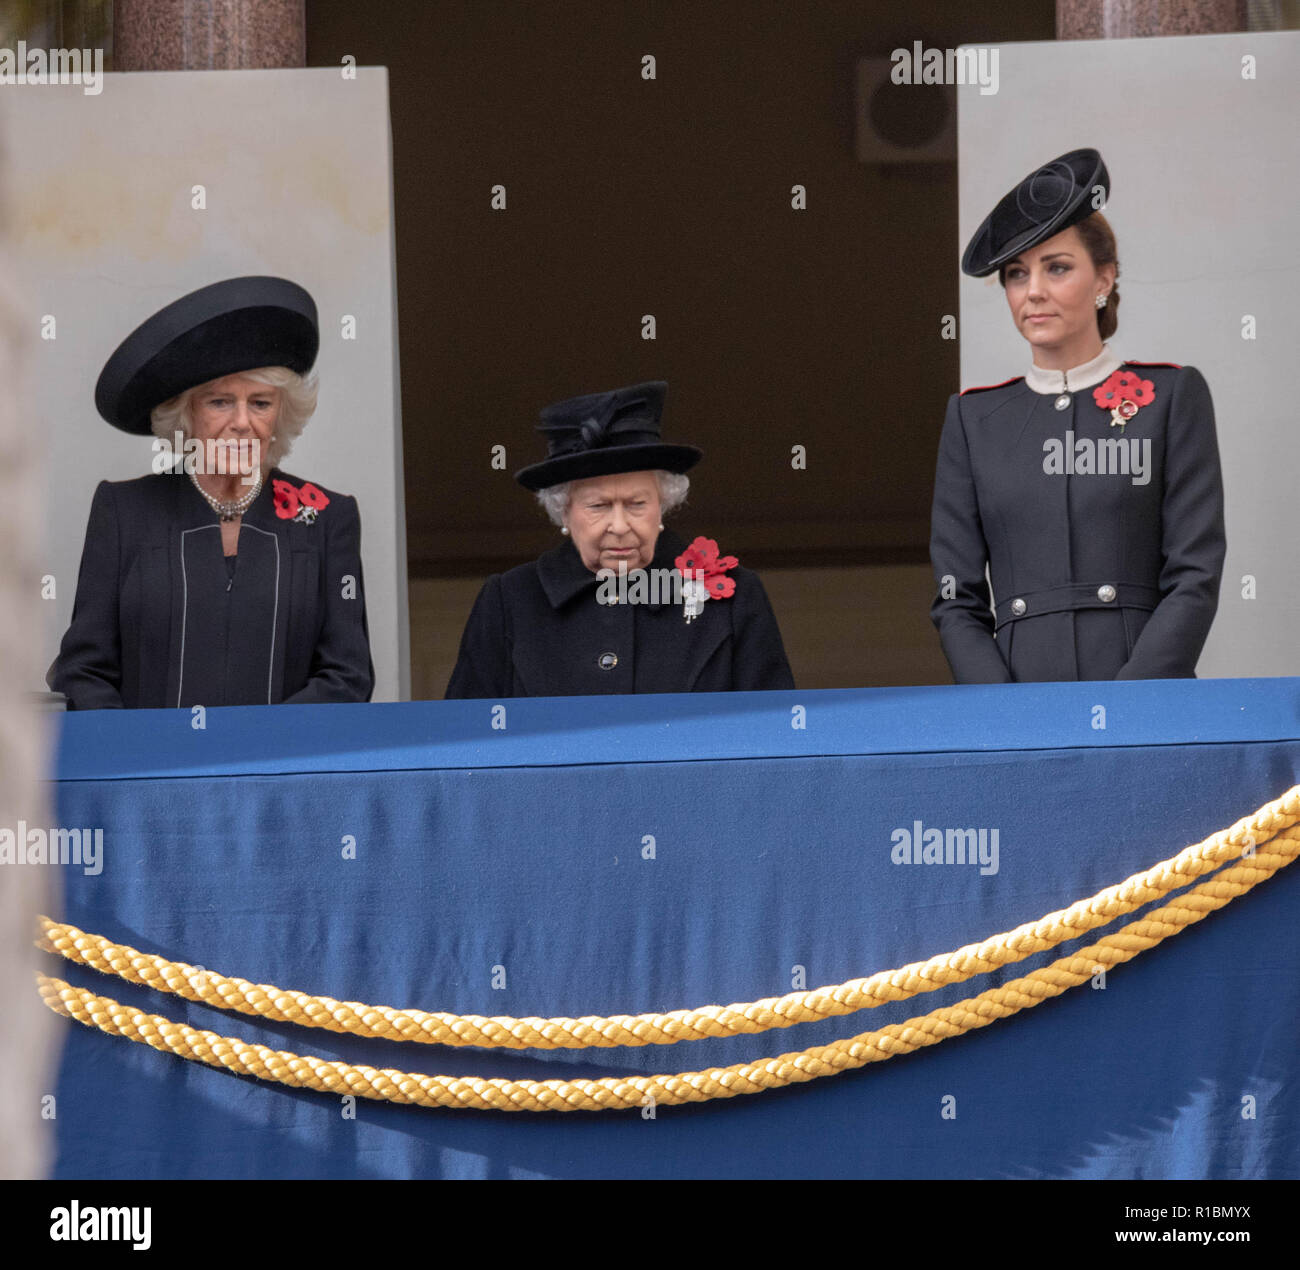 London UK, 11th November 2018  The National Service of Remembrance  at the Cenotaph London on Remembrance Sunday in the presence of HM The Queen, the Prime Minster, Theresa May, former prime ministers, senior government ministers  and representatives of the Commenwealth HM The Queen (center) HRH The Duchess of Cornwall and HRH The Duchess of Cambridge Credit Ian Davidson/Alamy Live News Stock Photo